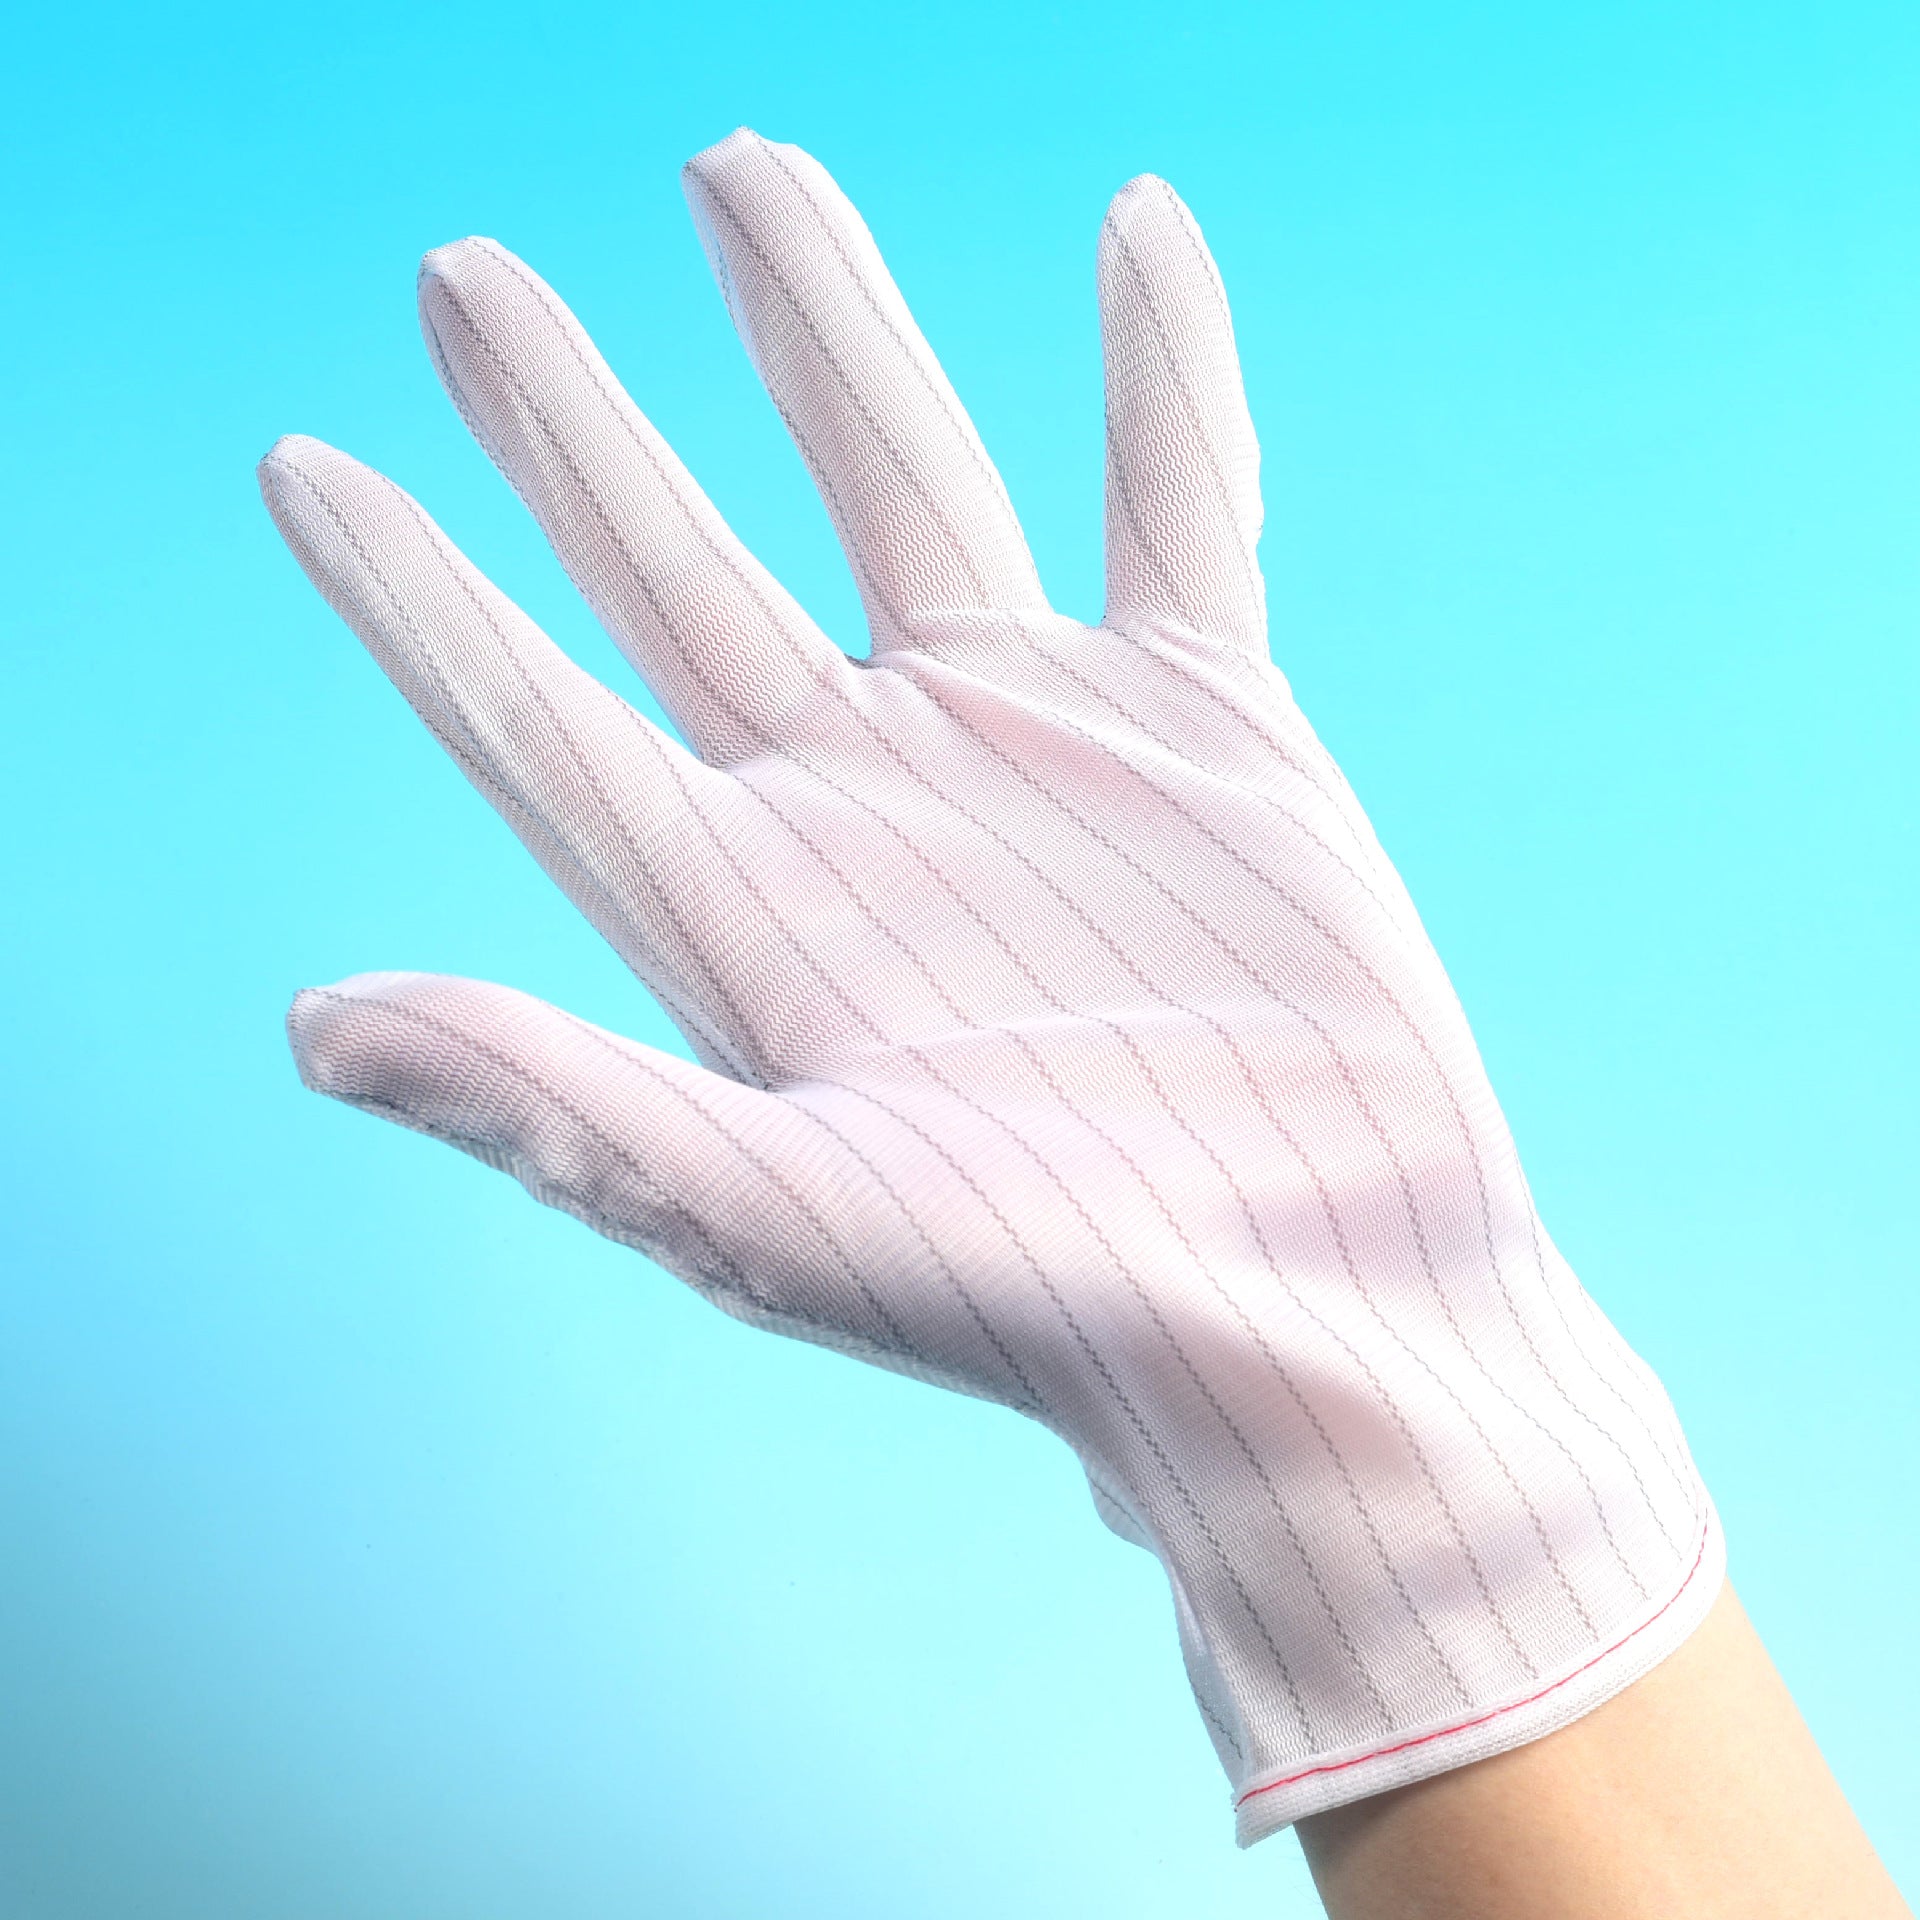 Breathable, sweat resistant, and electrostatic gloves